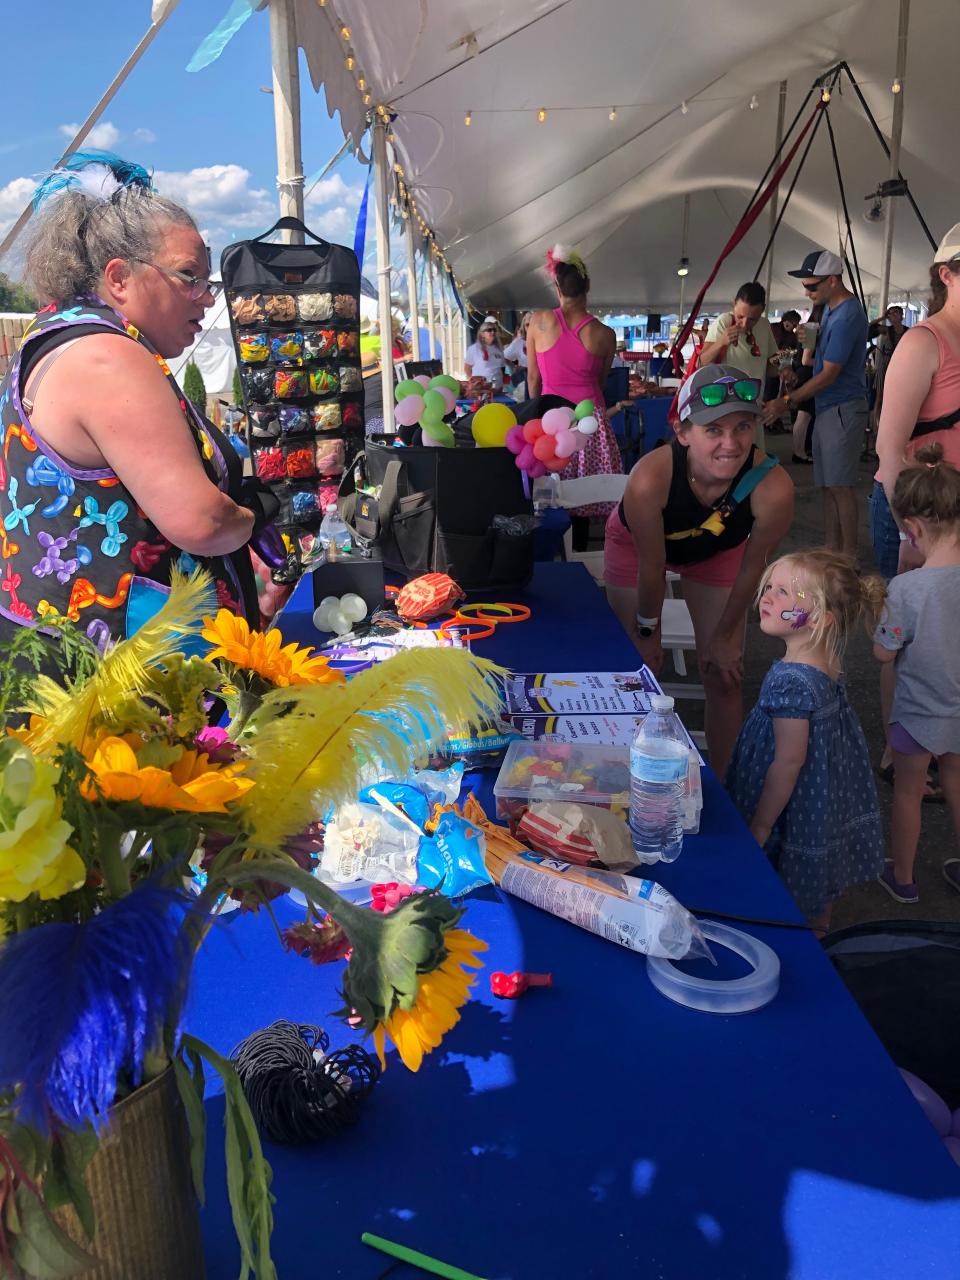 The first Little Italy Carnival on Sunday, Aug. 6, 2023 in Portsmouth featured many activities, free toys, candy and other giveaways for children. Above is the face painting and balloon animal station in the Boston Circus Guild tent.